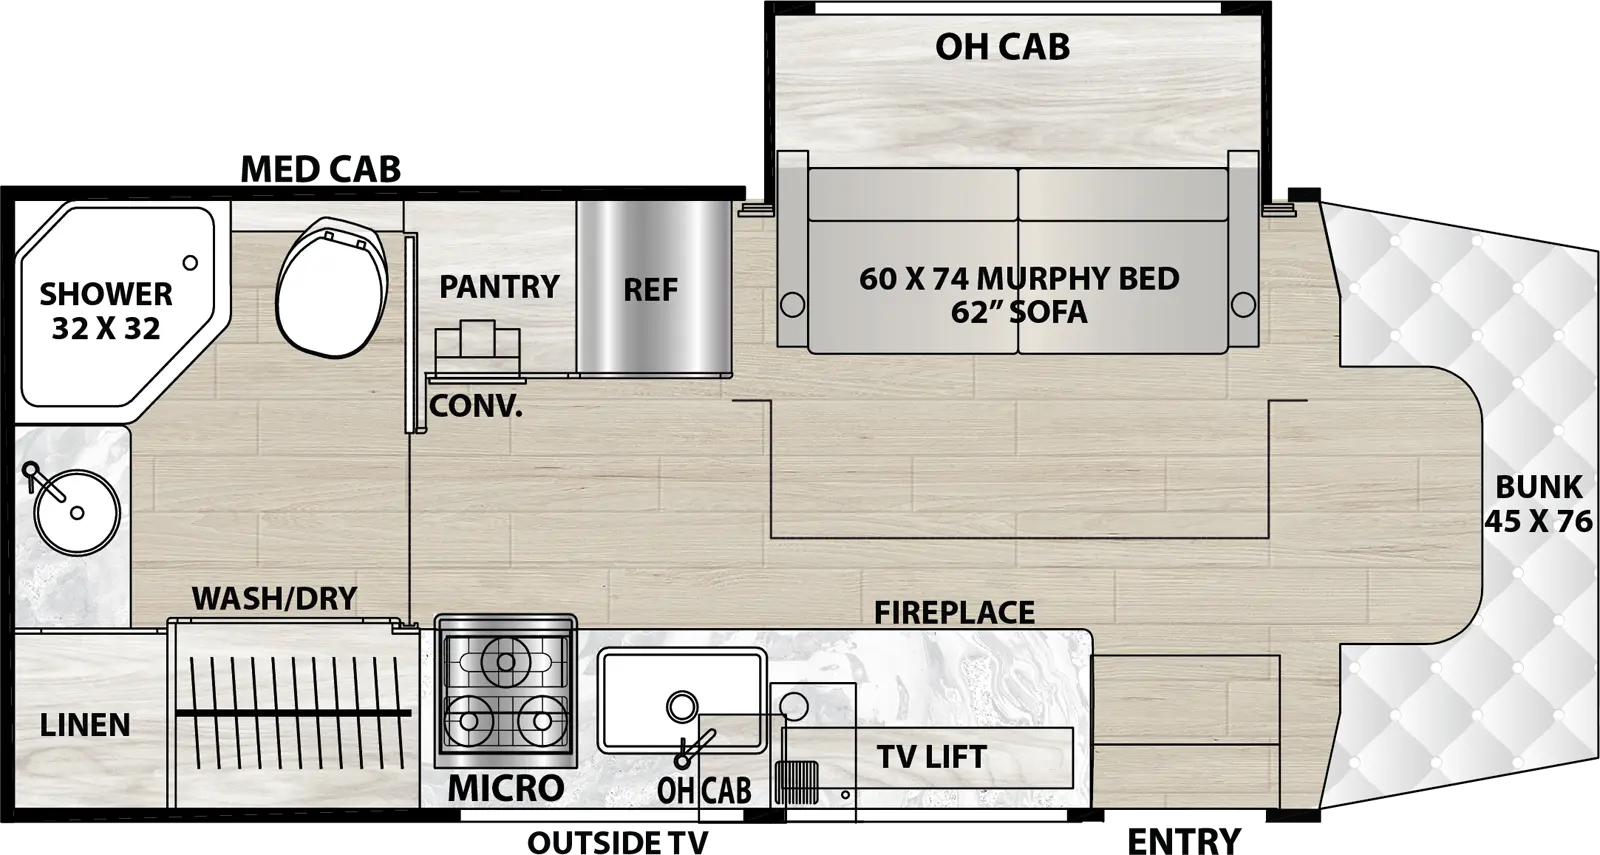 The 24MBS has one slideout and one entry. Exterior features an outside TV. Interior layout front to back: Front cab with cab-over bunk, off-door side slideout with overhead cabinet and murphy bed sofa; door side entry, fireplace with TV lift, sink, overhead cabinet, microwave and cooktop; off-door side refrigerator and pantry; bathroom with off door side shower, toilet and medicine cabinet, rear sink, and door side linen closet, and closet with washer/dryer.